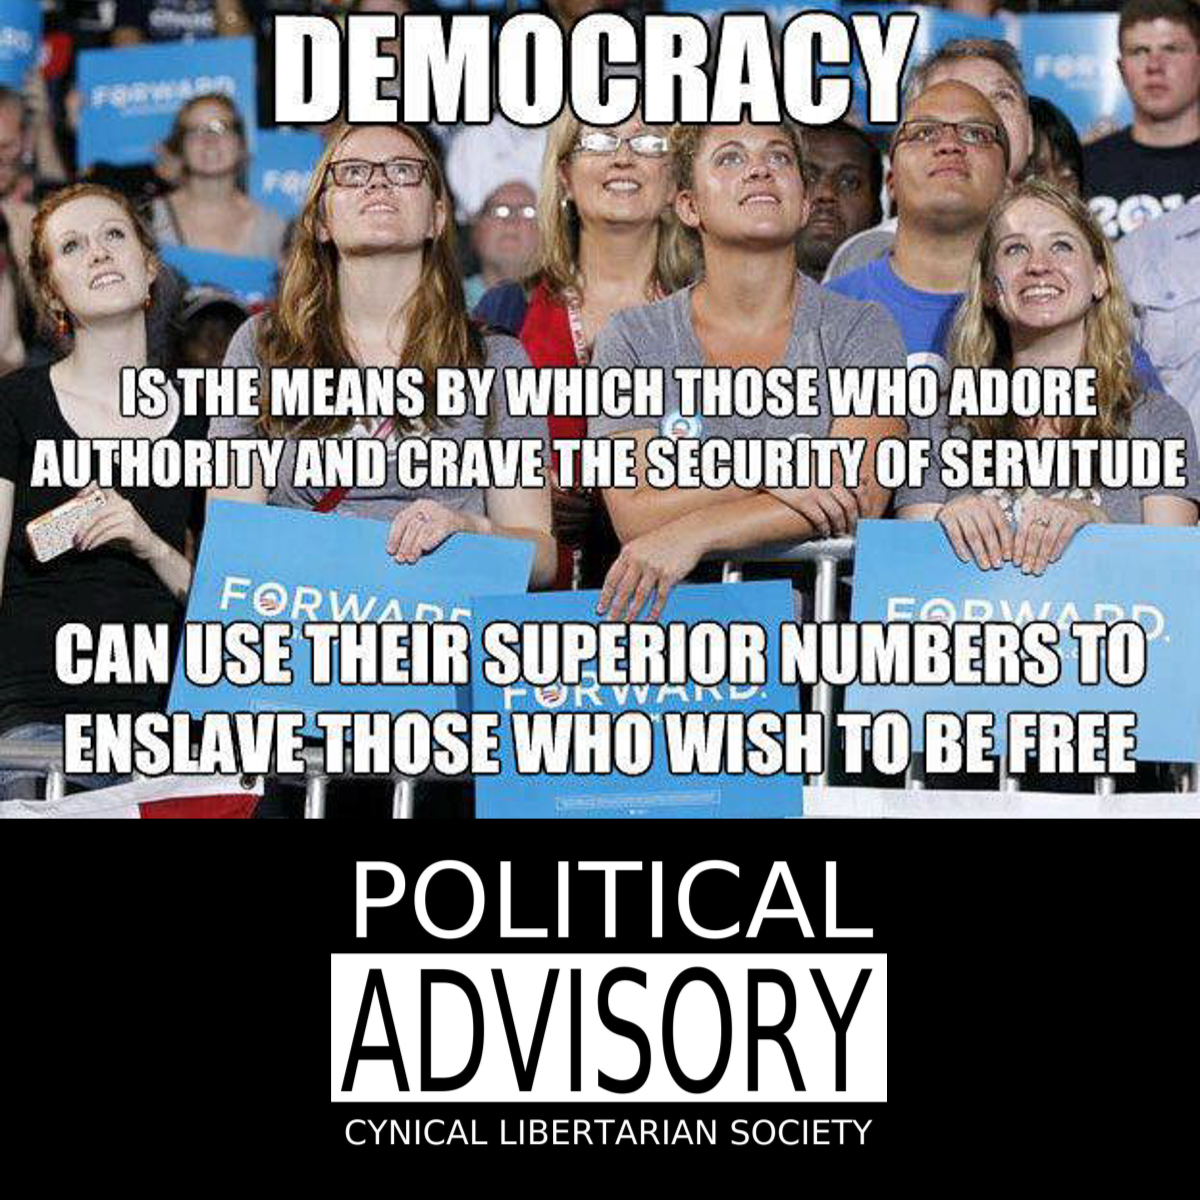 democracy is the stupid enslaving others